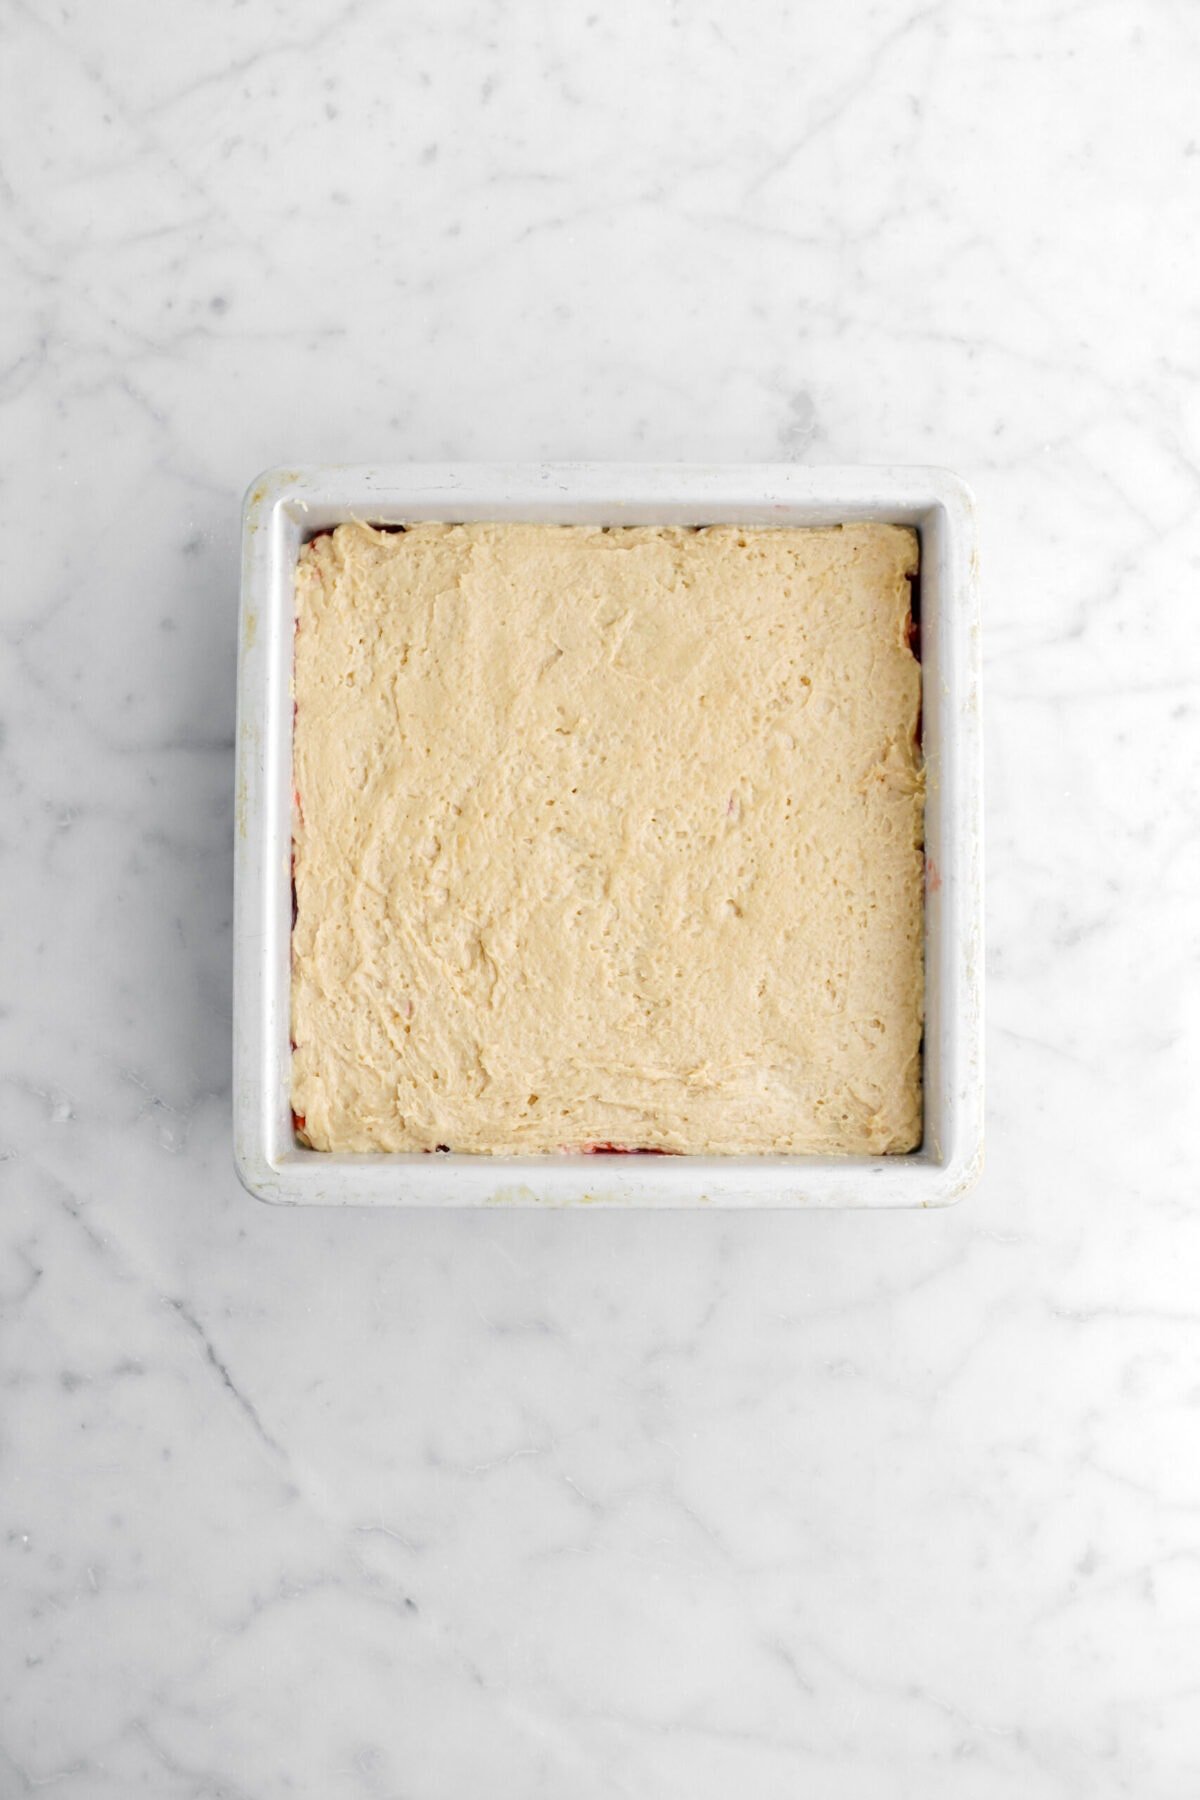 peanut butter cake batter in square pan.